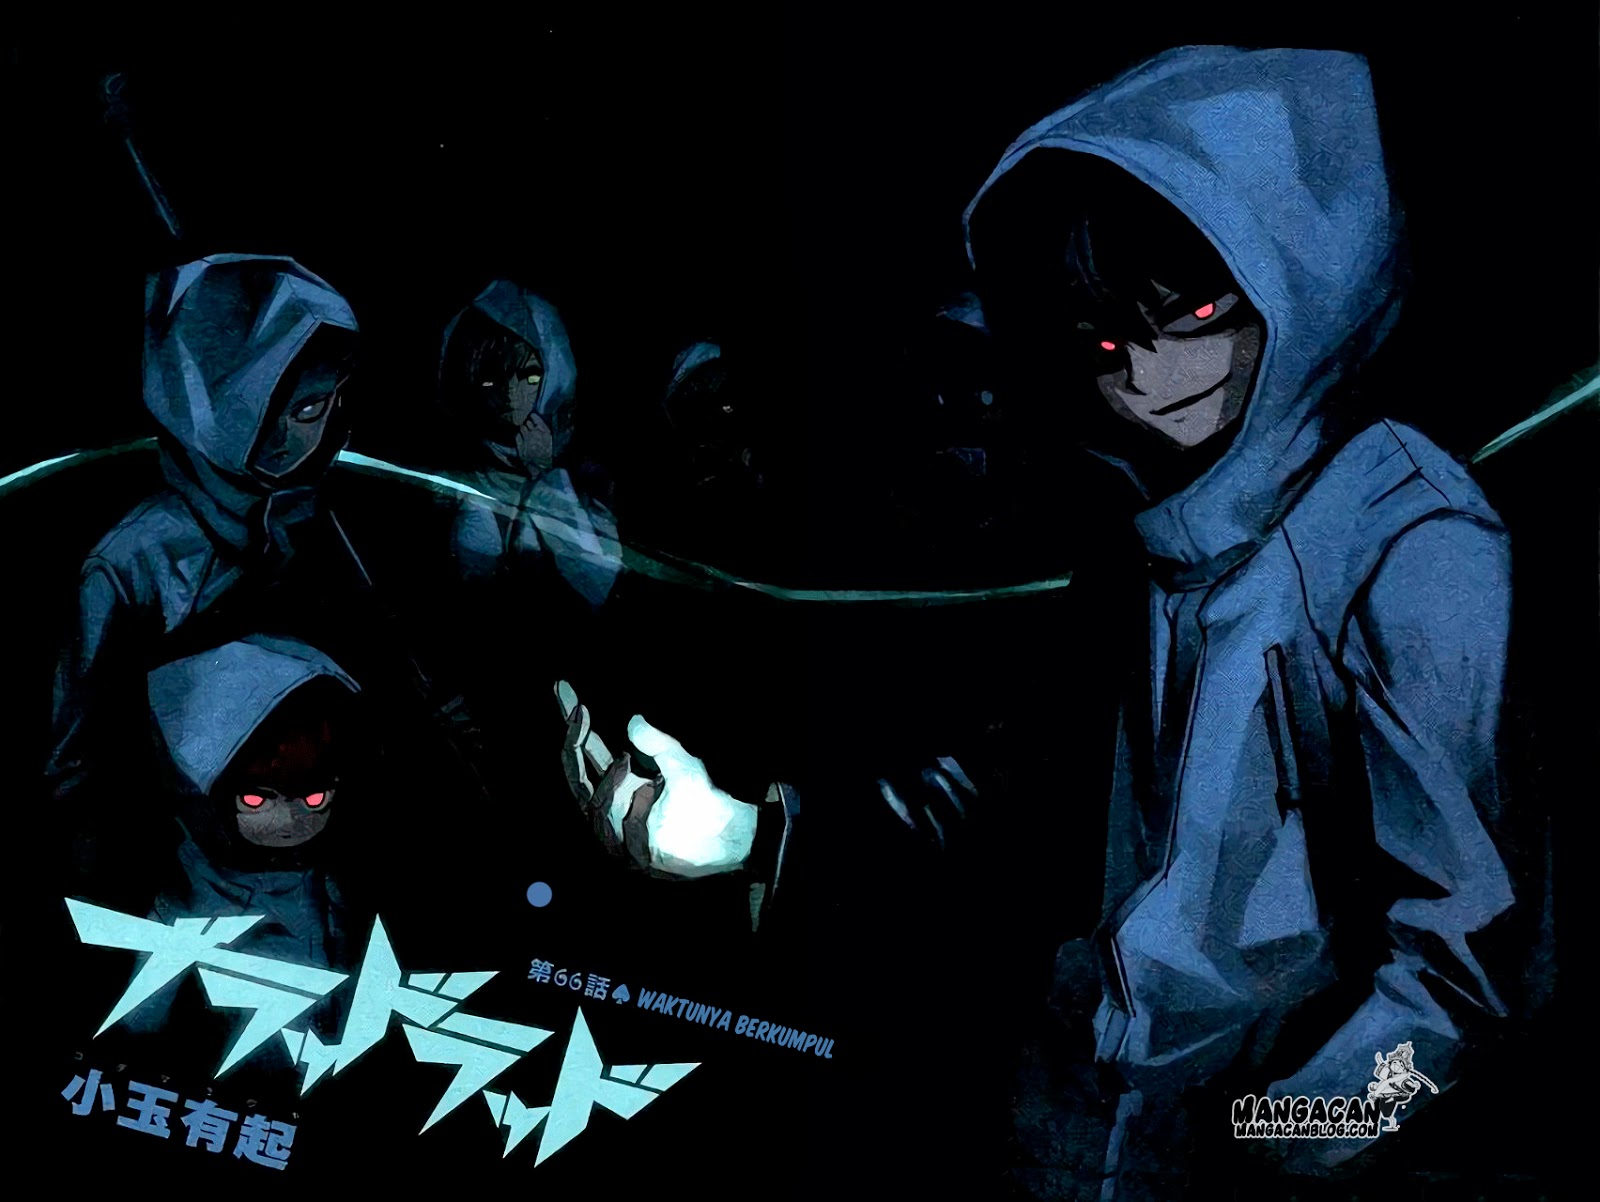 Blood Lad Chapter 66